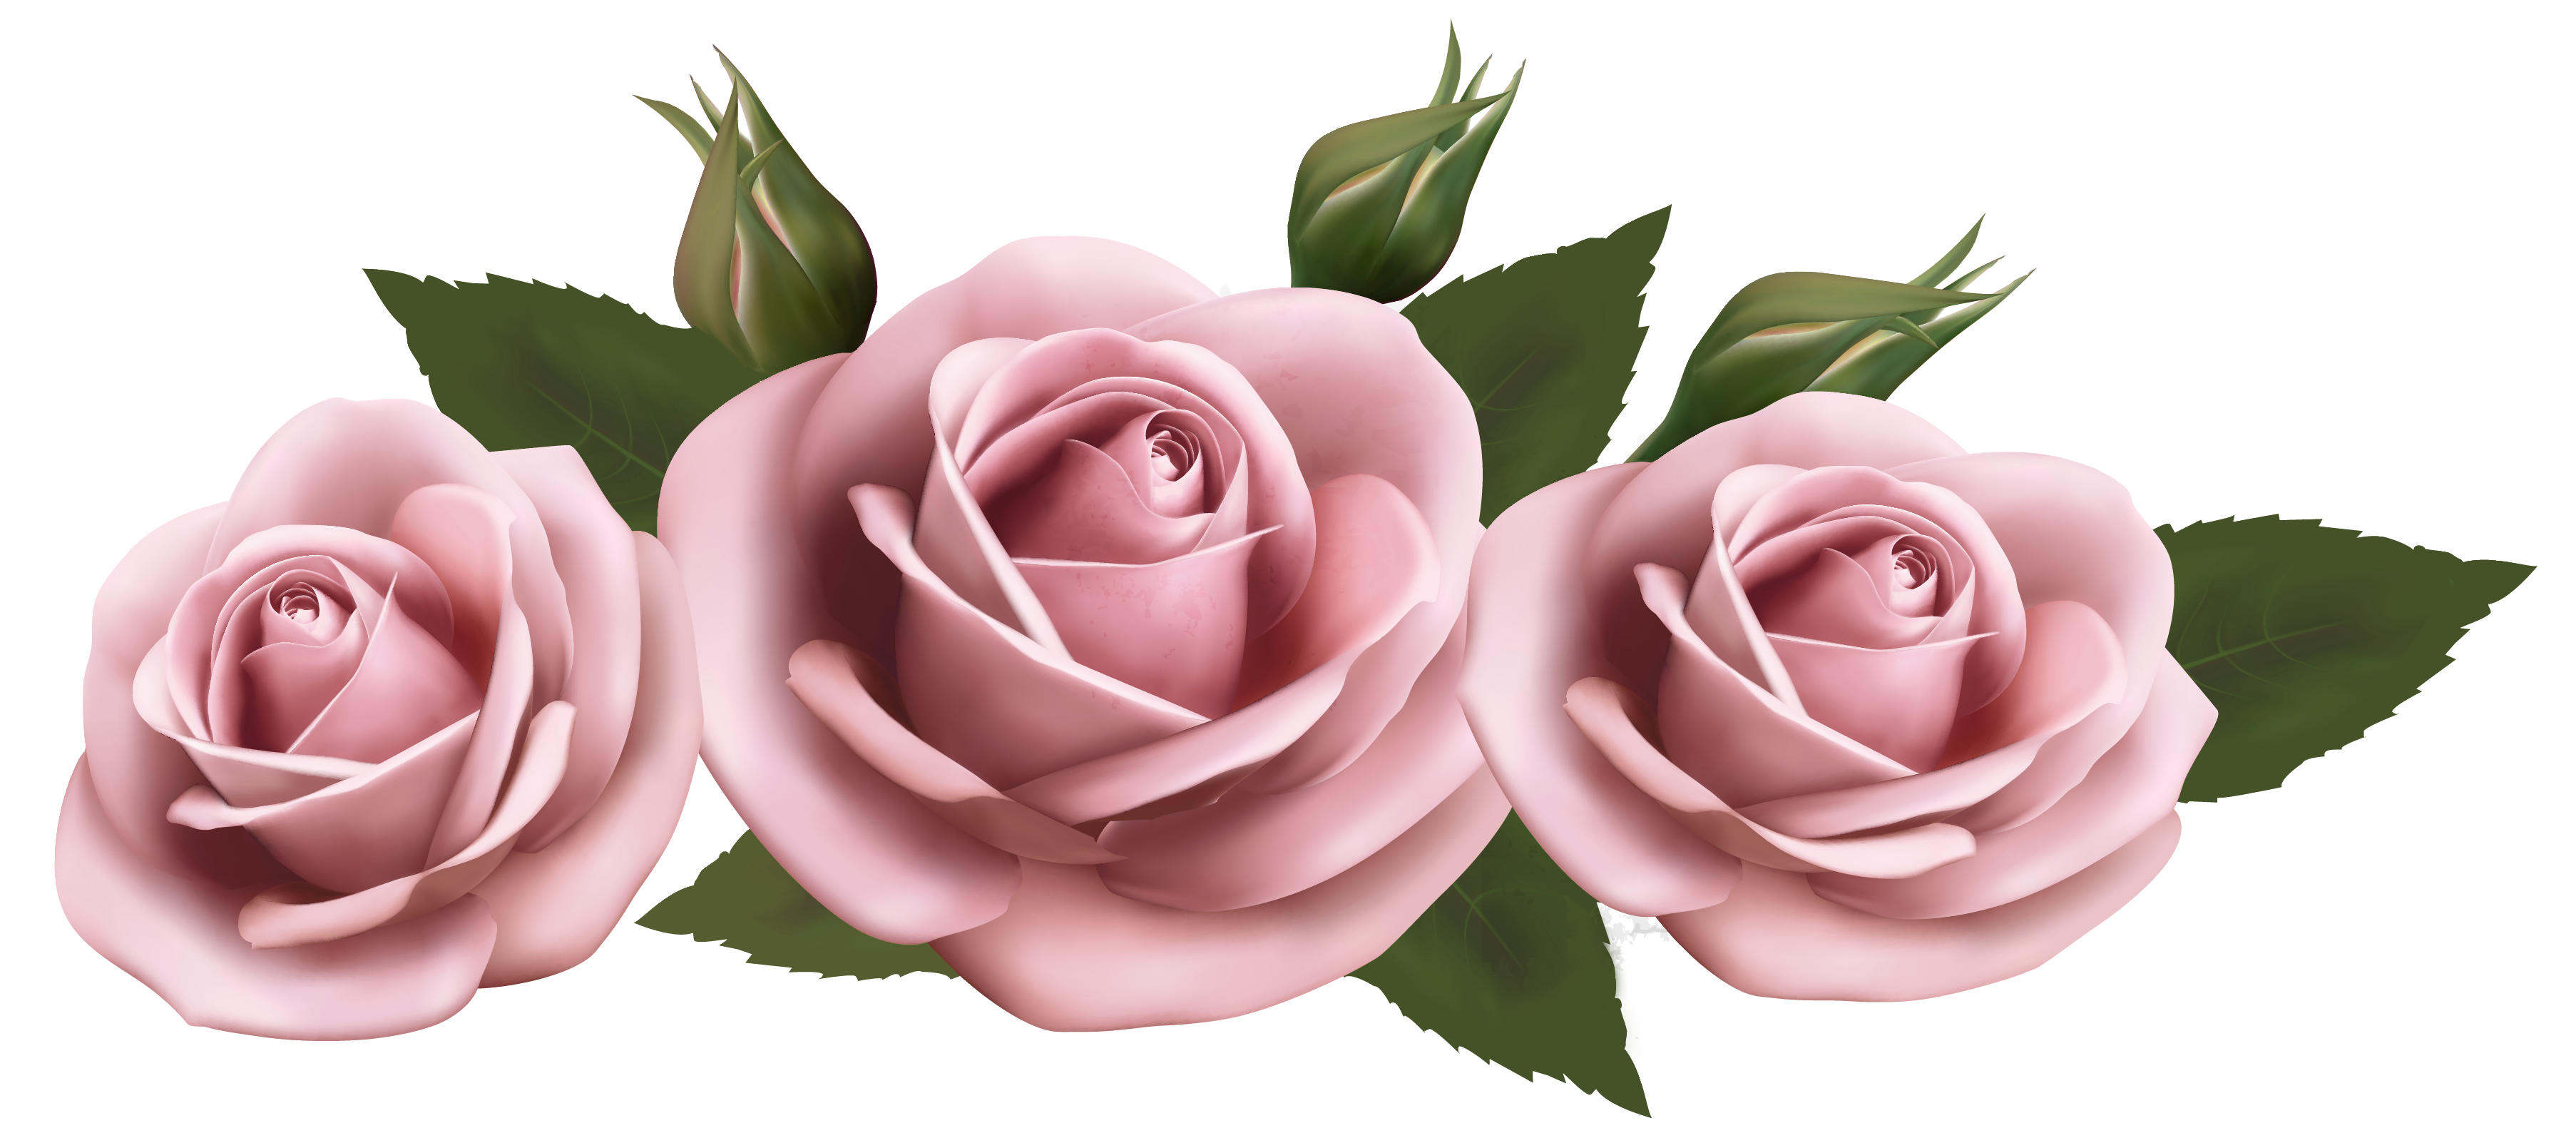 Rose Flower Beautiful Transparent Pink Roses Png Picture